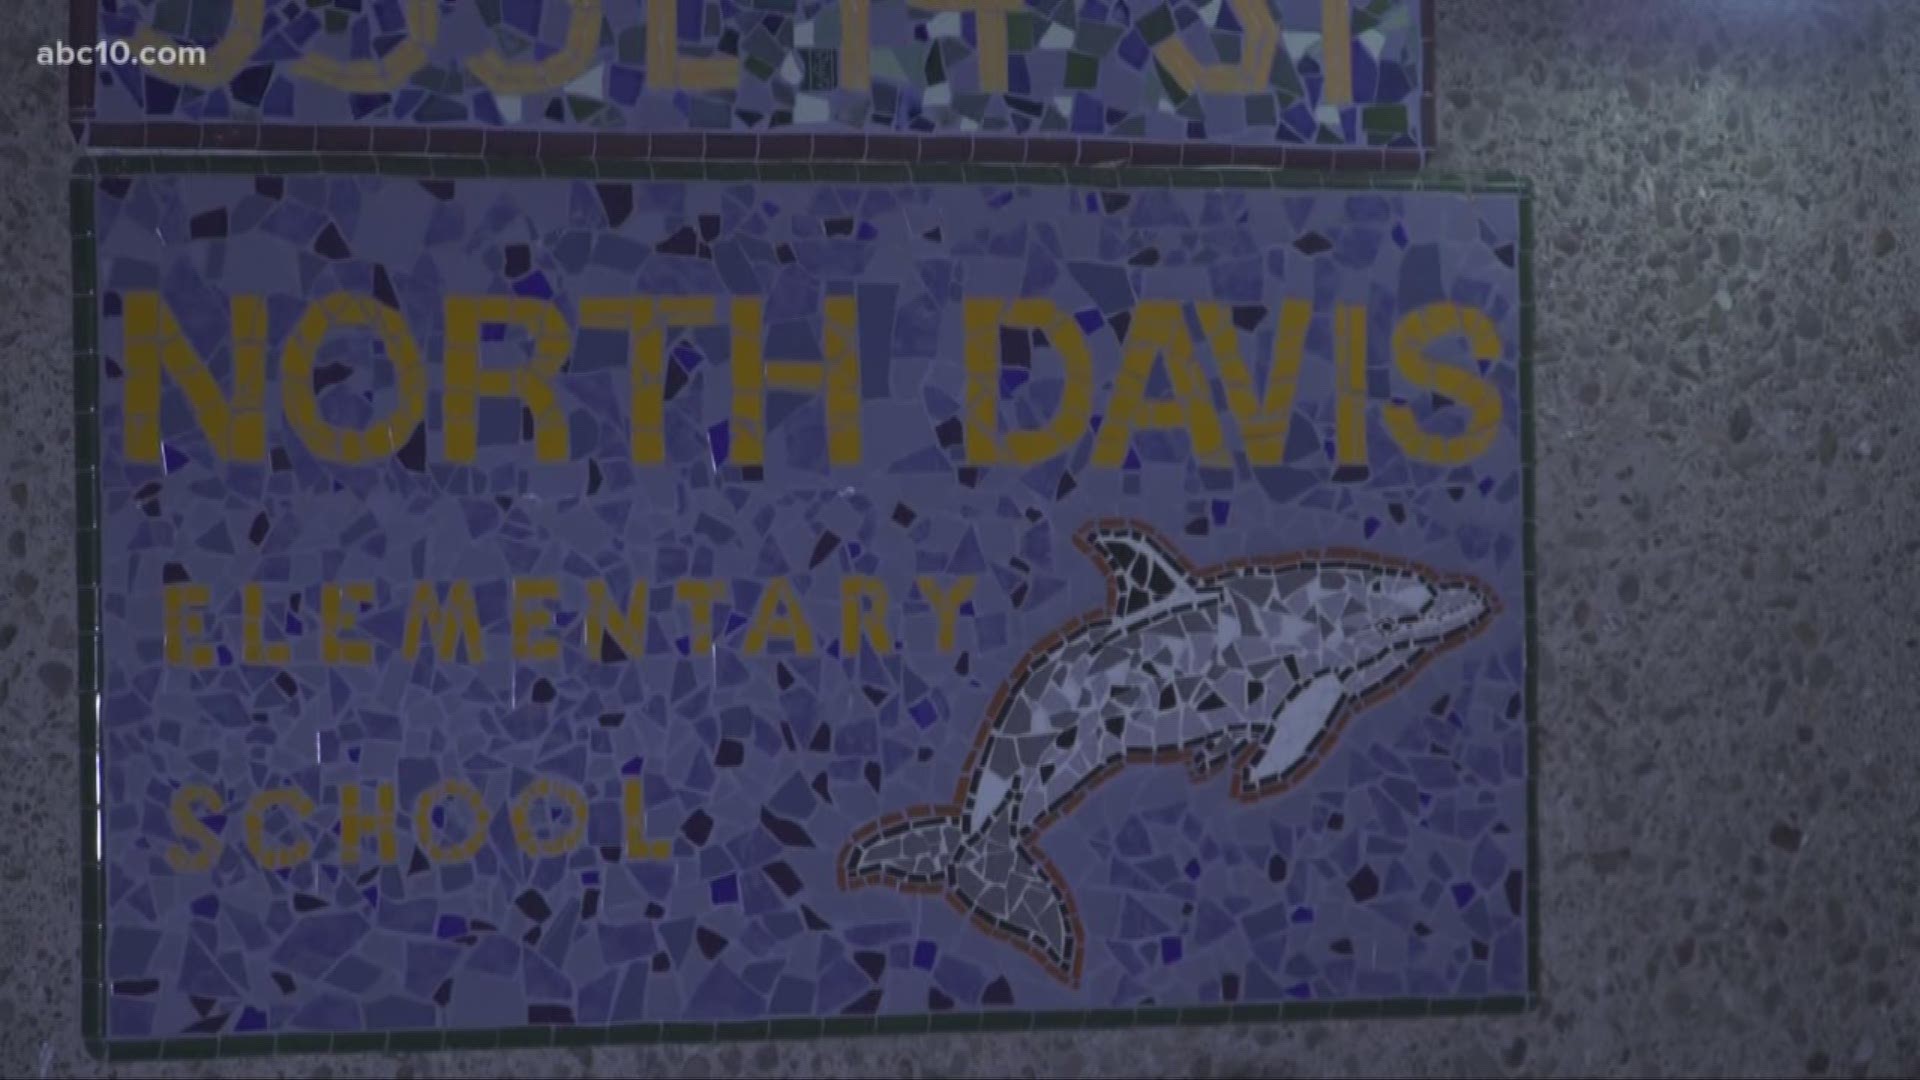 For more than a generation, North Davis Elementary School has been just that: North Davis Elementary. It might seem like a simple name, but a proposal to change it in honor of a well-known educator is something many parents are not happy about.